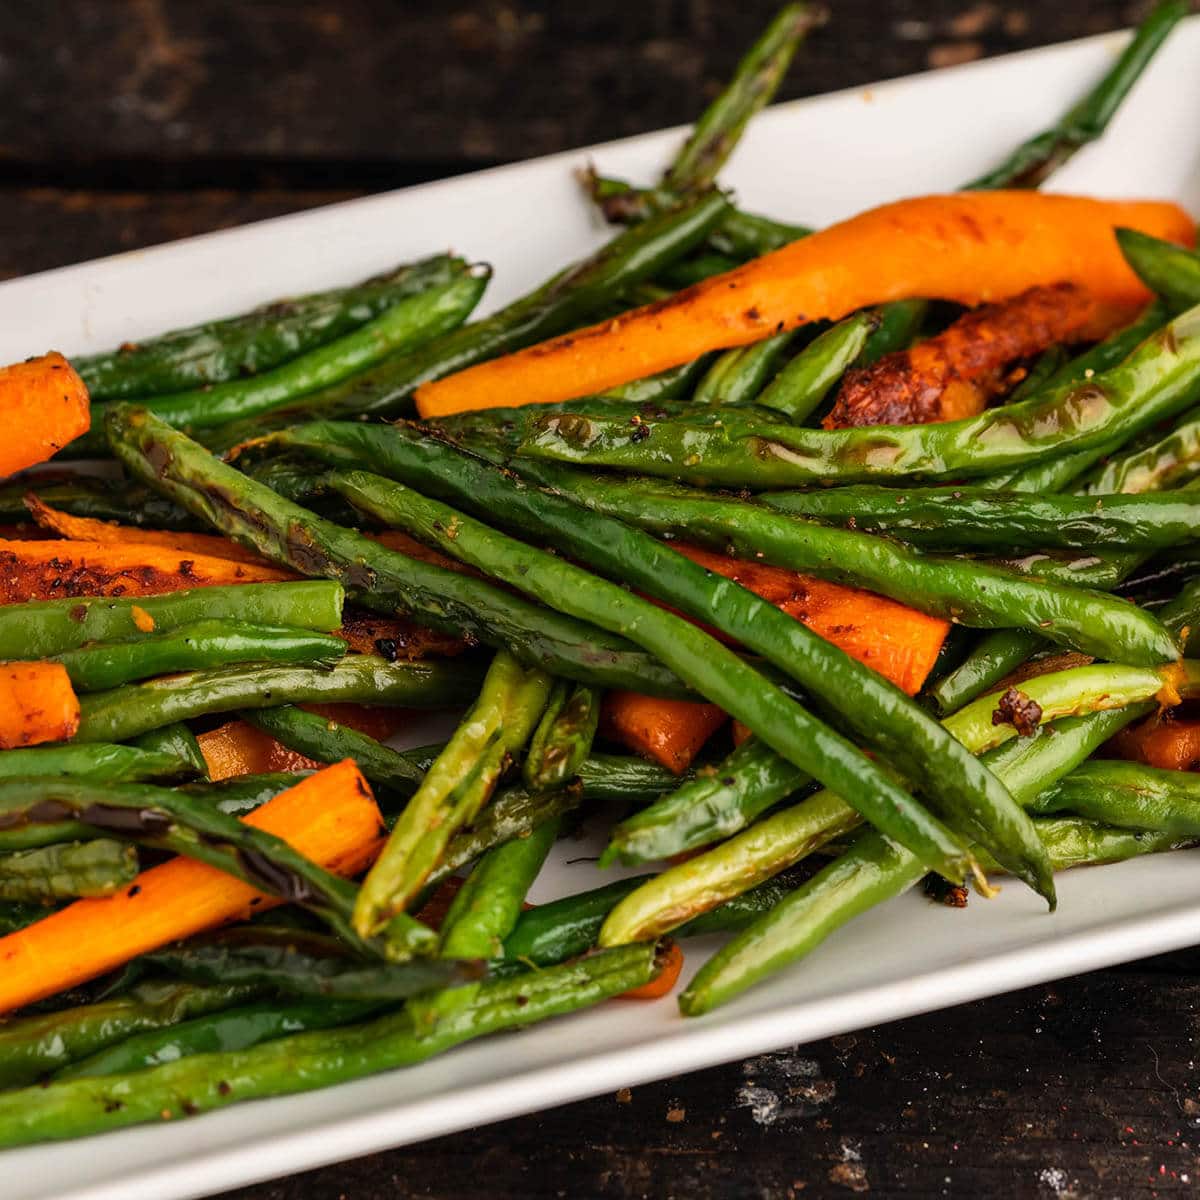 Roasted Green Beans and Carrots on platter.